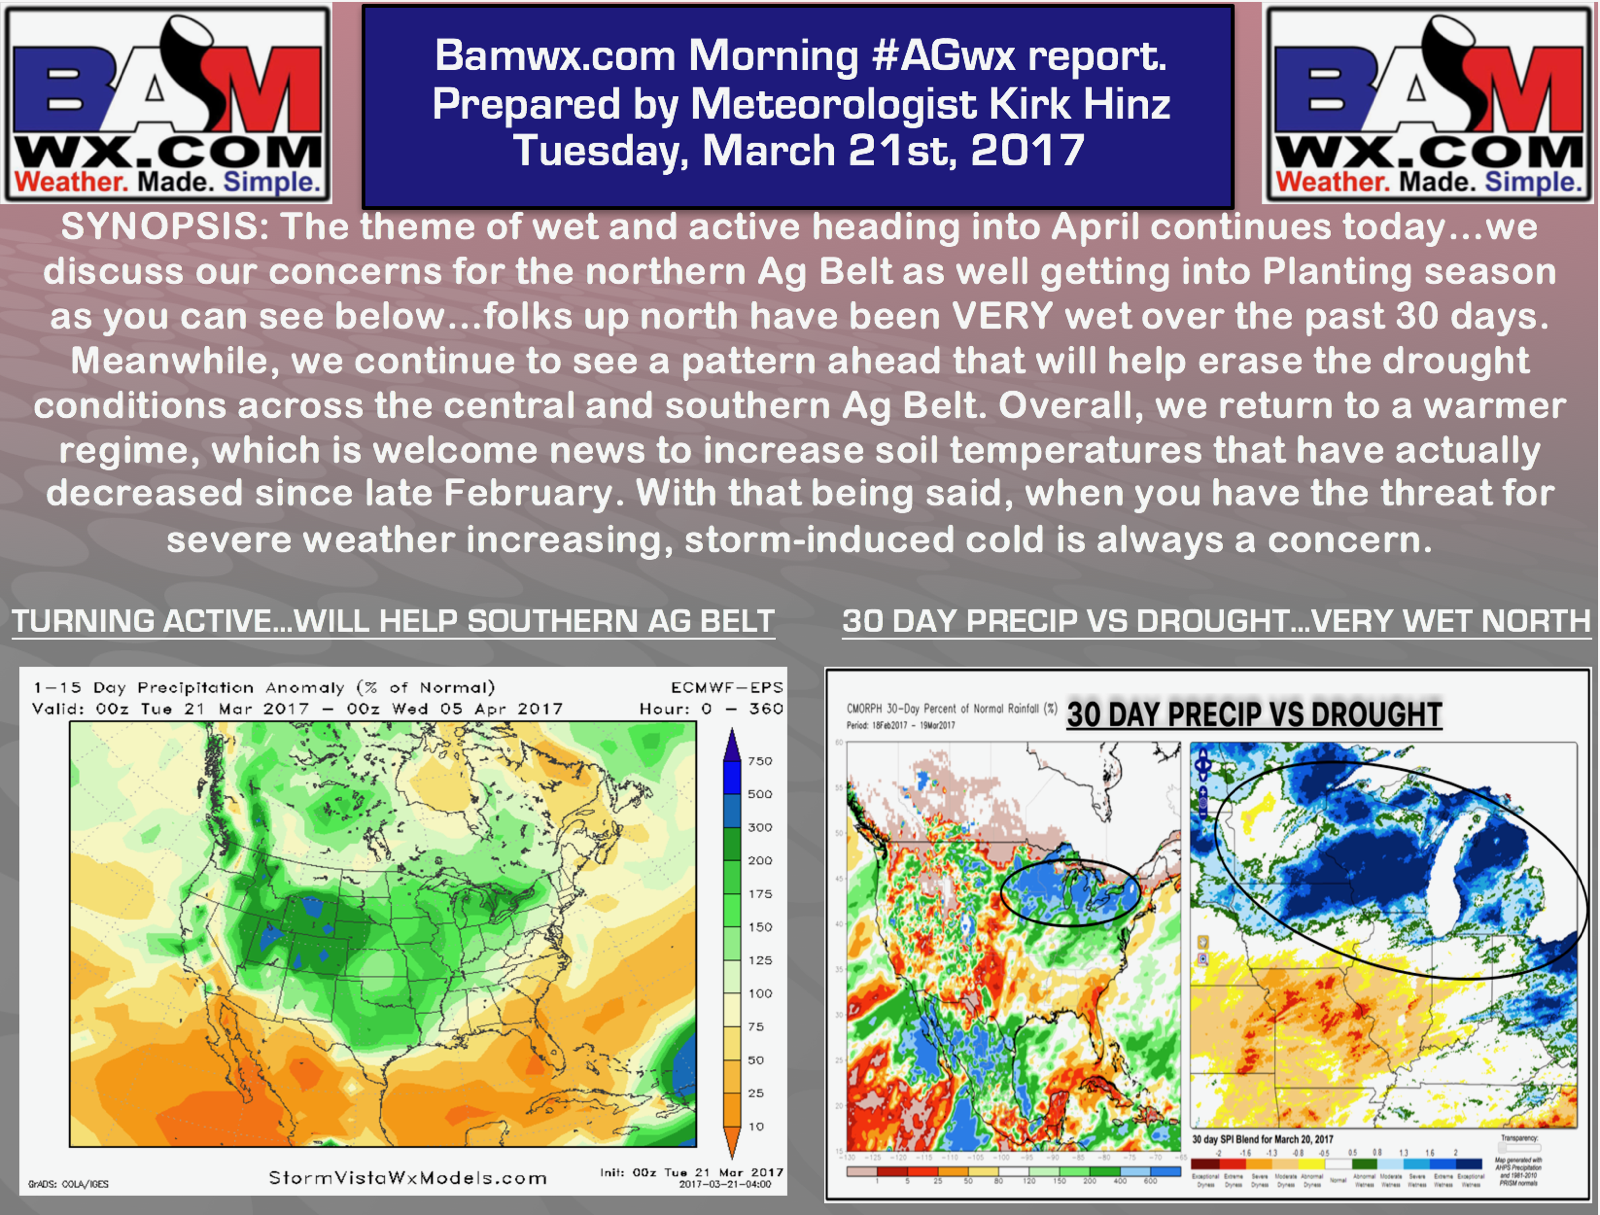 #AGwx #Plant17 #Energy Warmer and Wetter Regime Through Early April. Details Here! E.